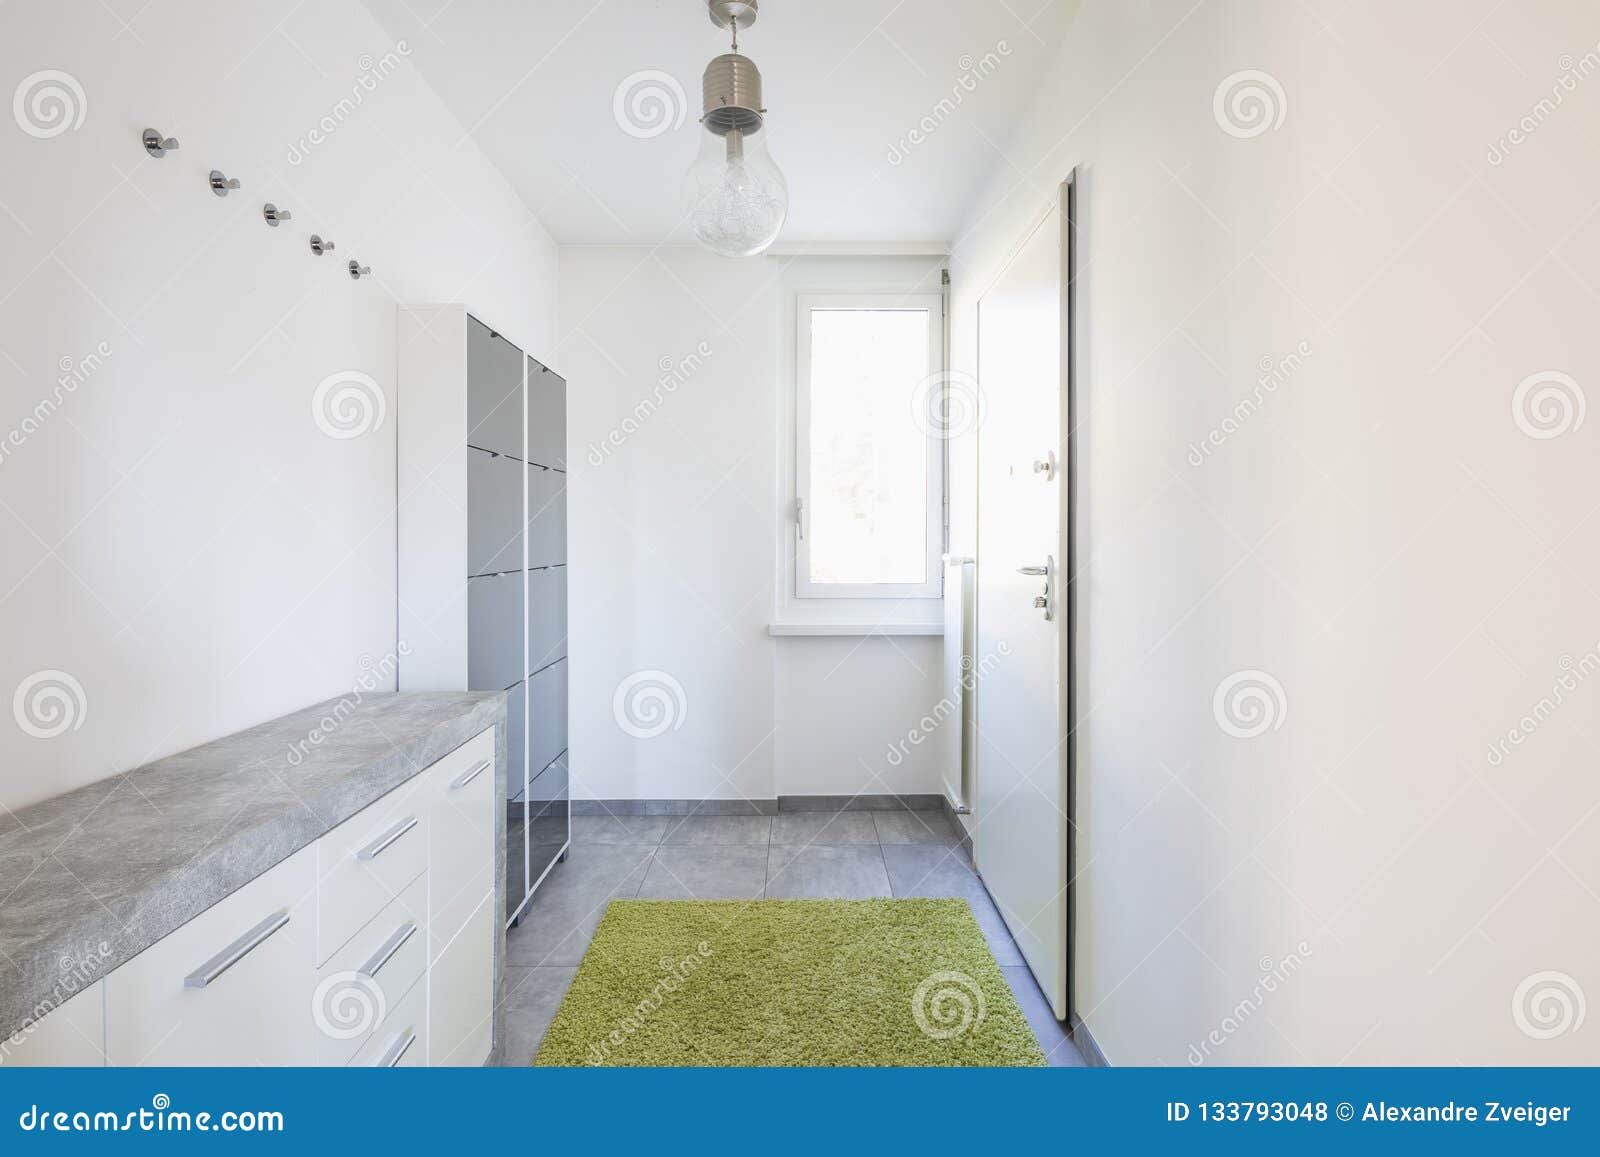 Minimalist Entrance With Shoe Rack And Carpet Stock Photo